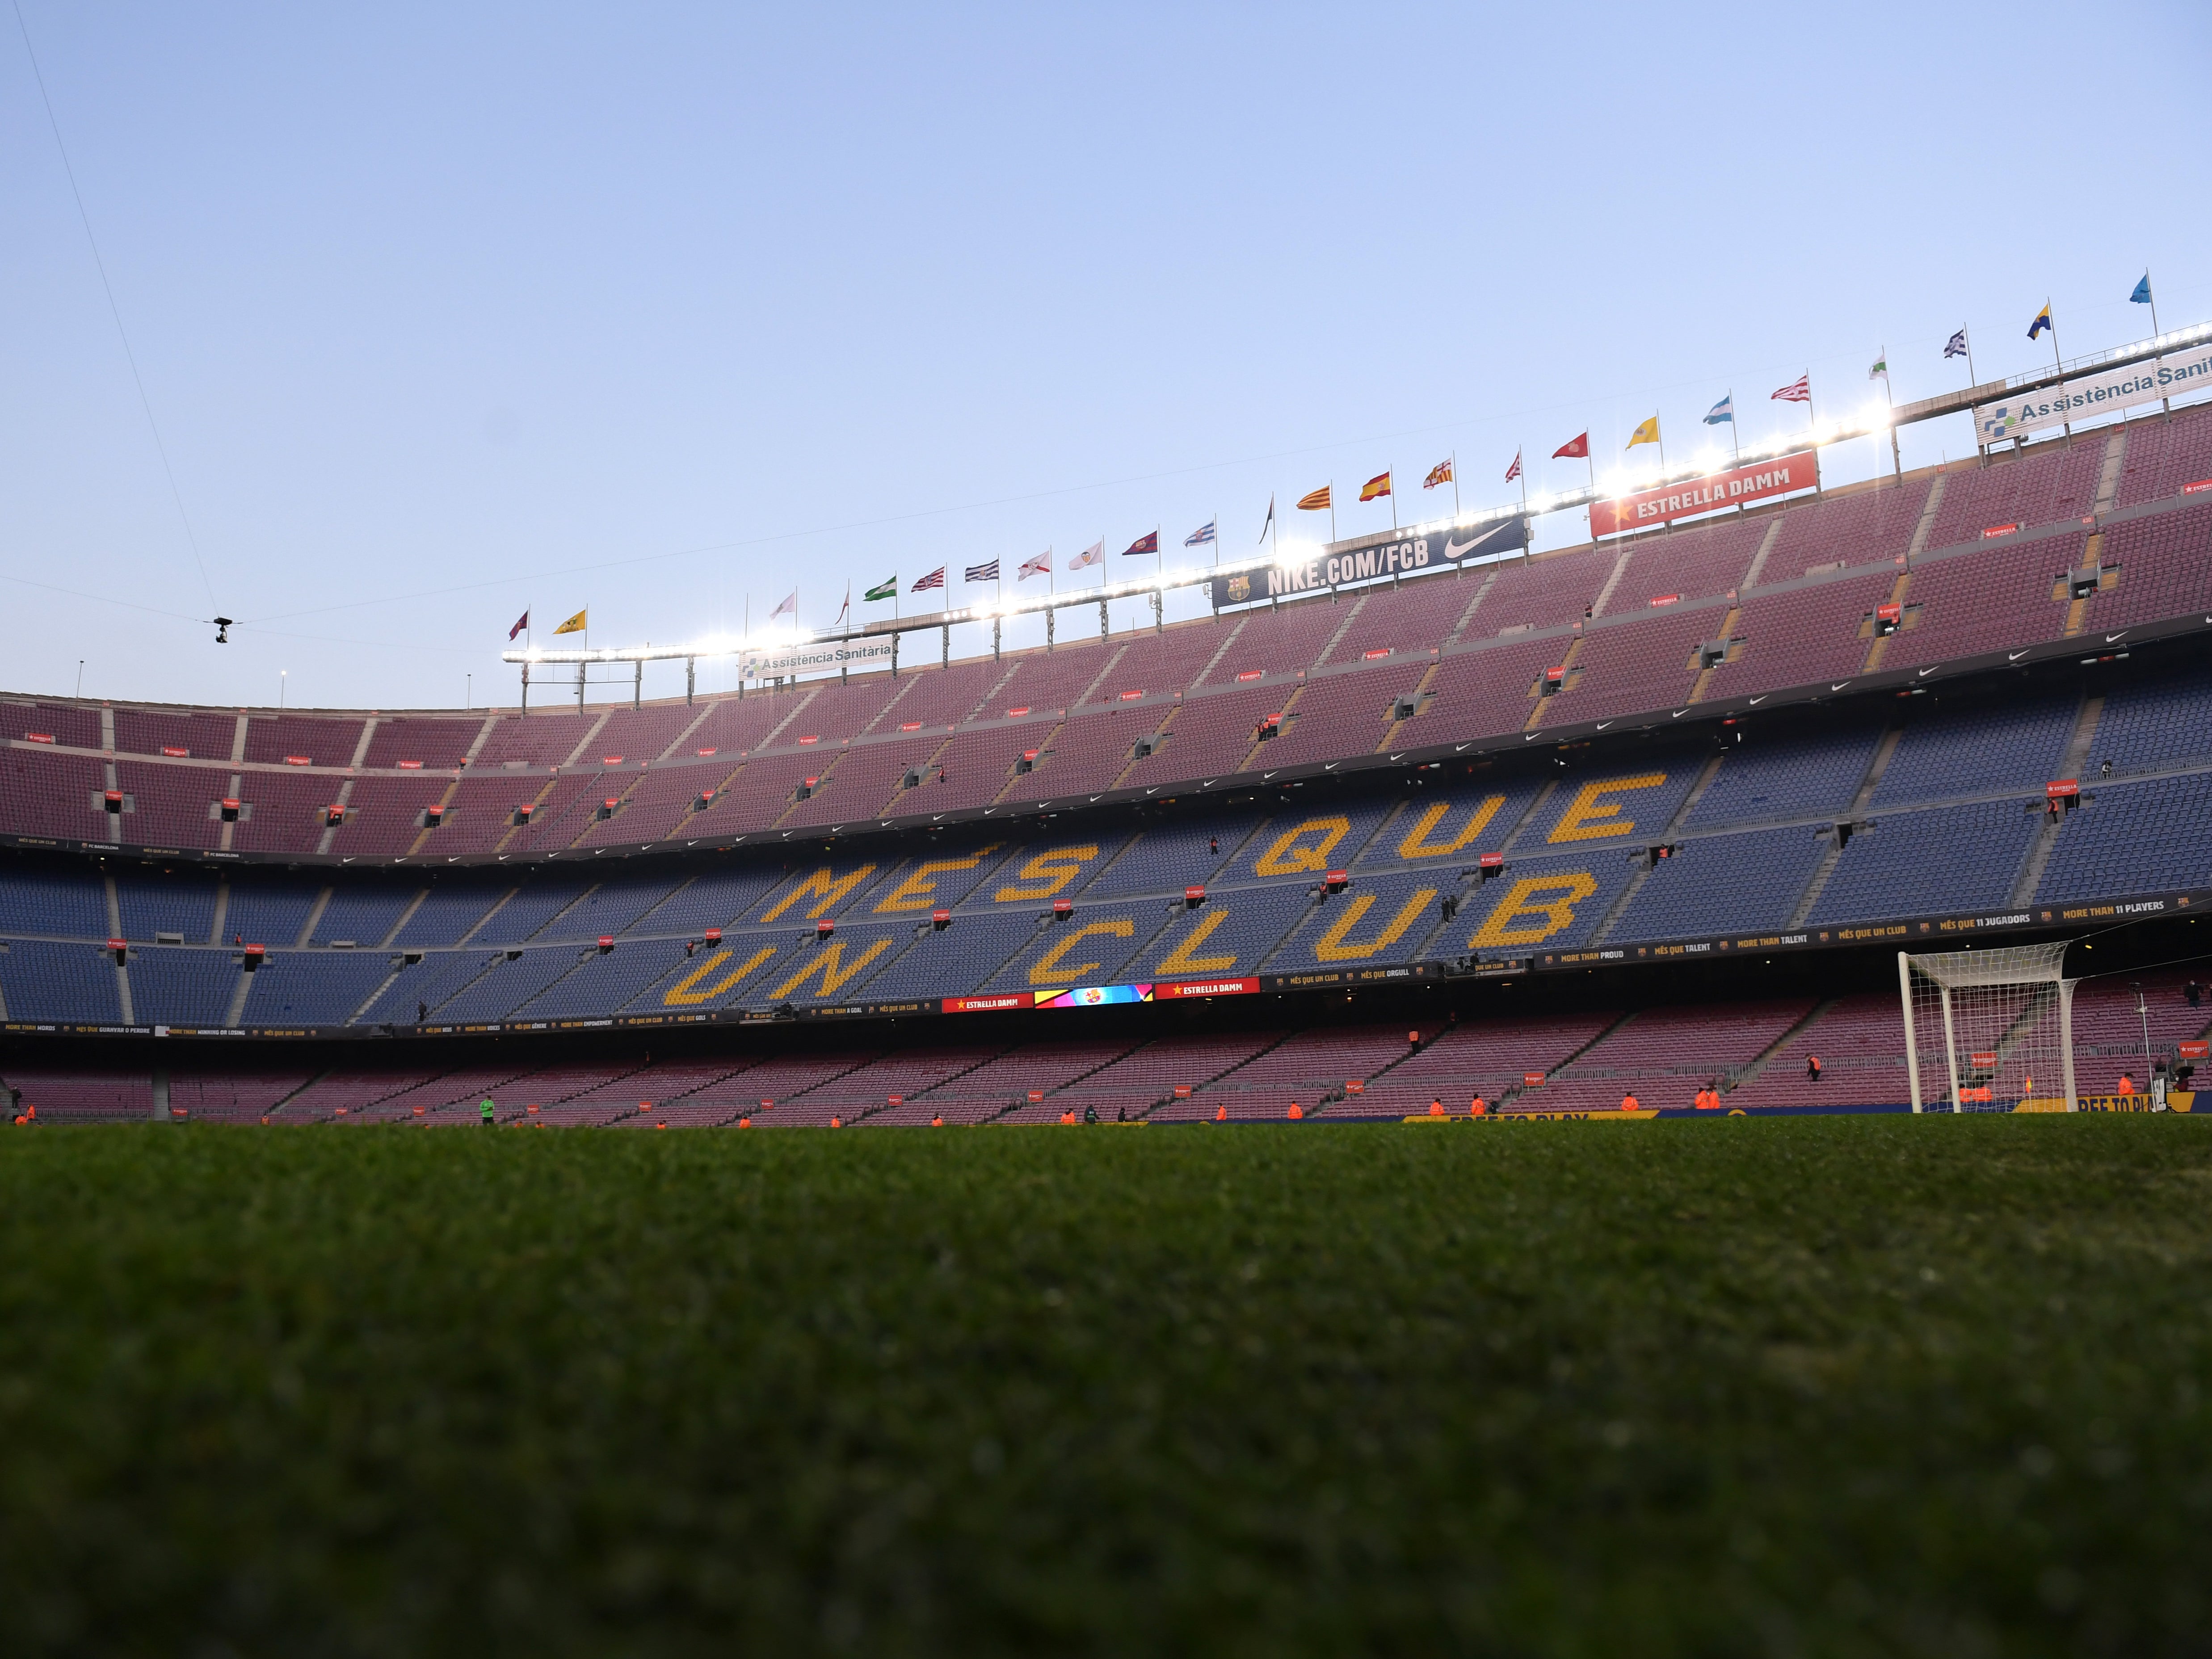 A general view of the Camp Nou